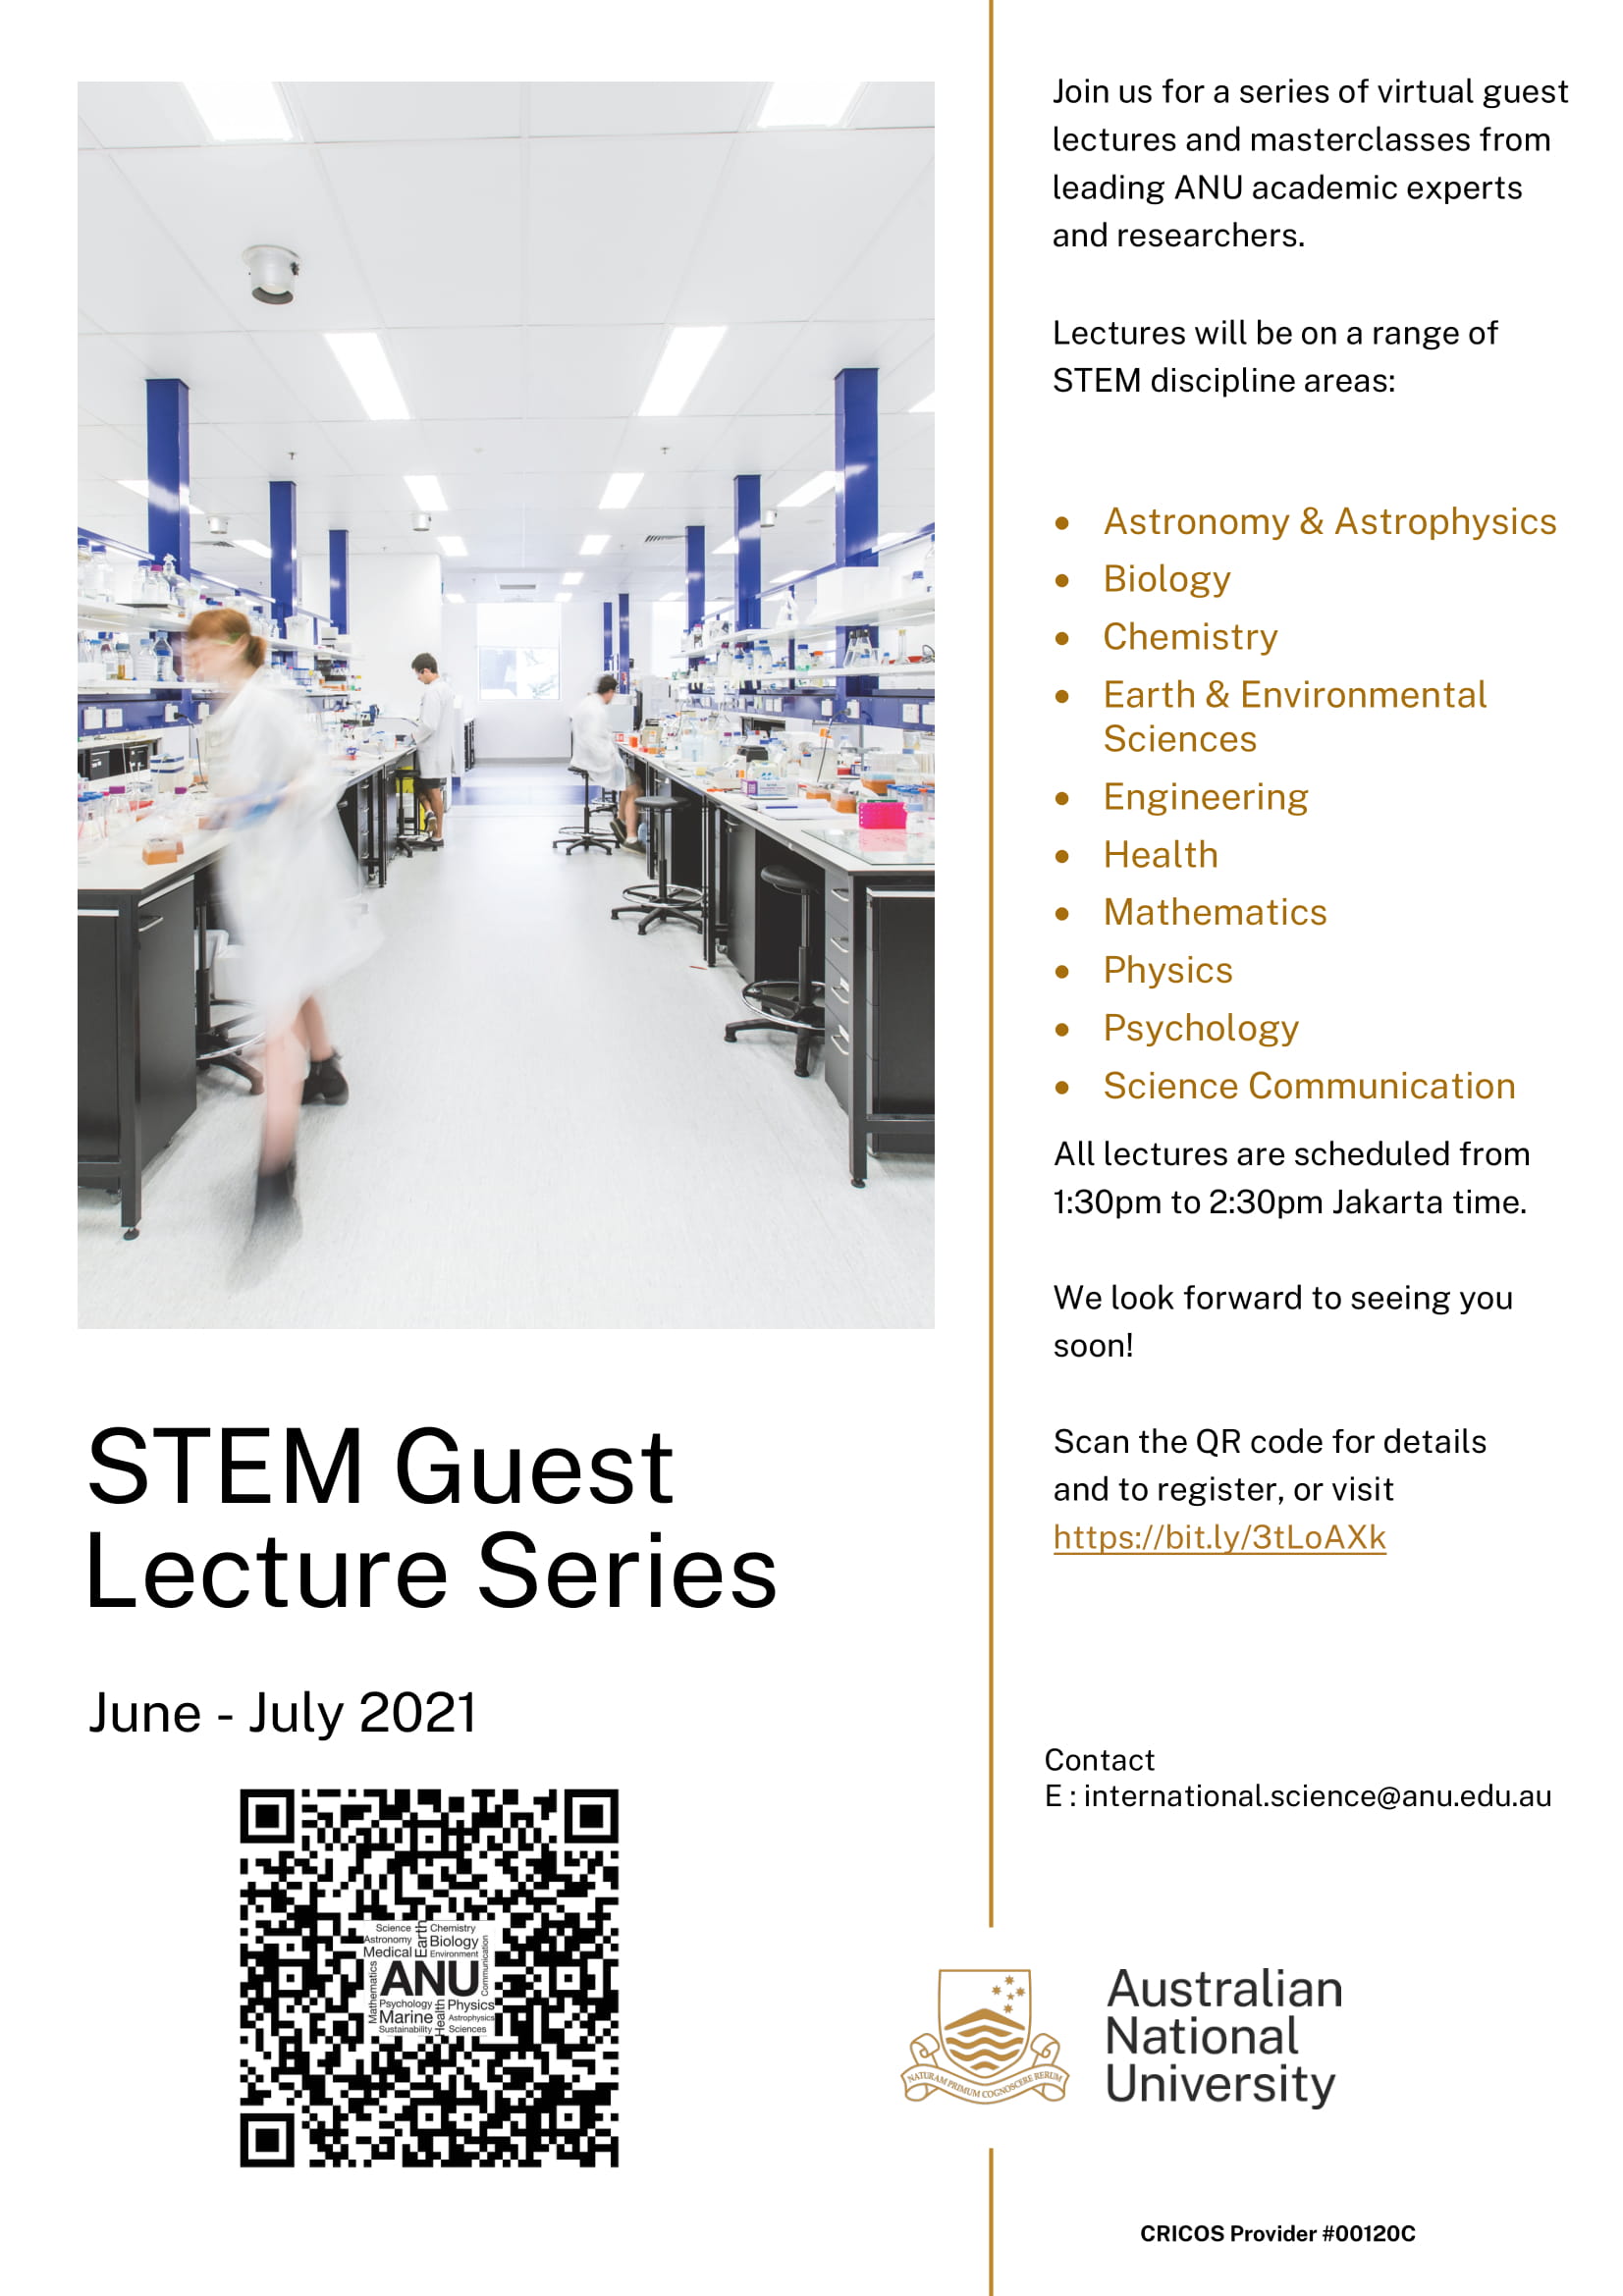 STEM Guest Lecturer Series from Australian National University